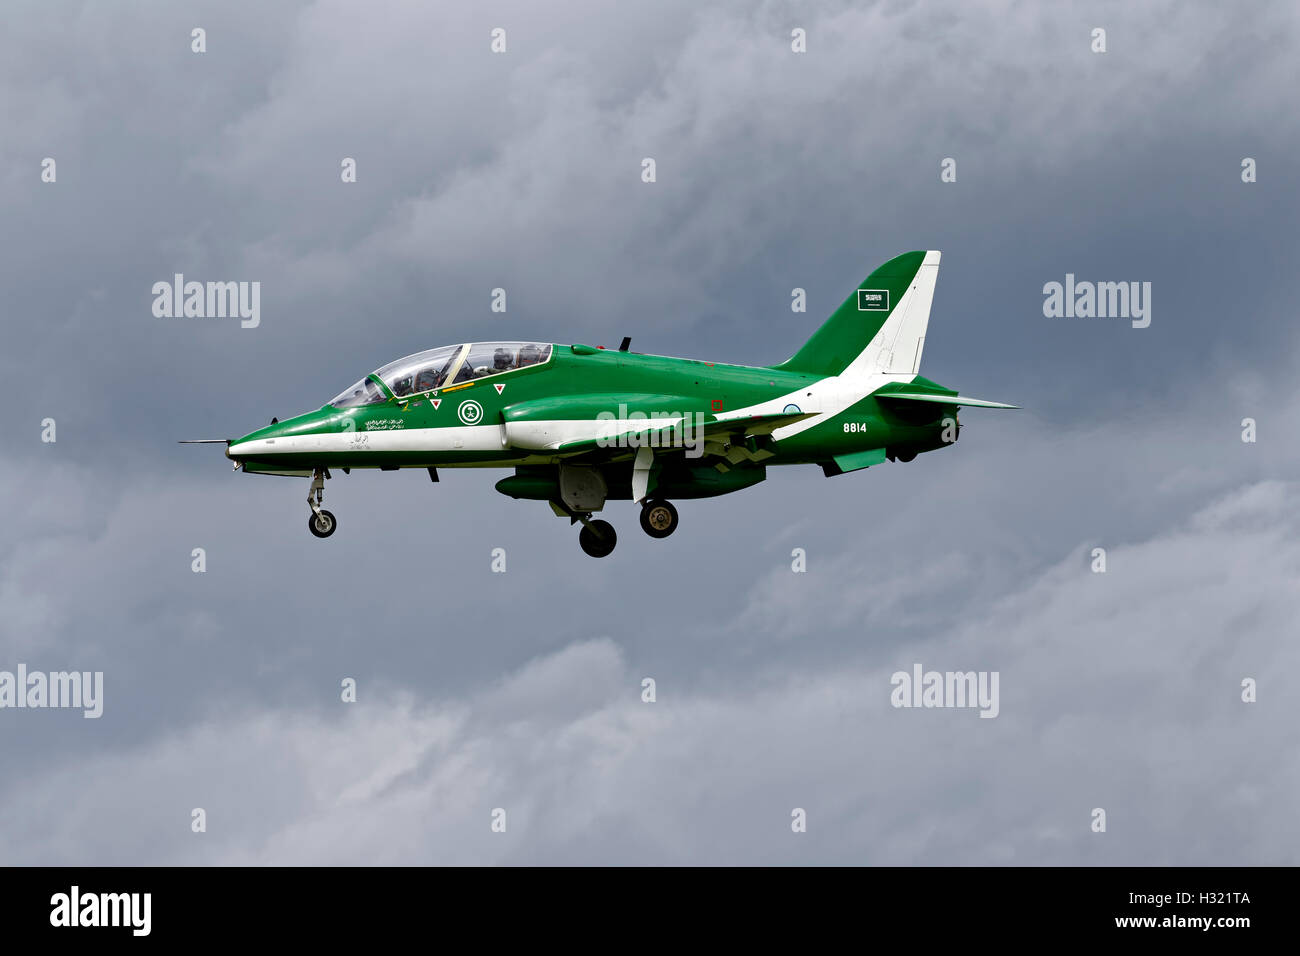 A BAe Systems Hawk Mk65 of the Royal Saudi Air Force National Display Team The Saudi Hawks on finals to land at RNAS Yeovilton. Stock Photo